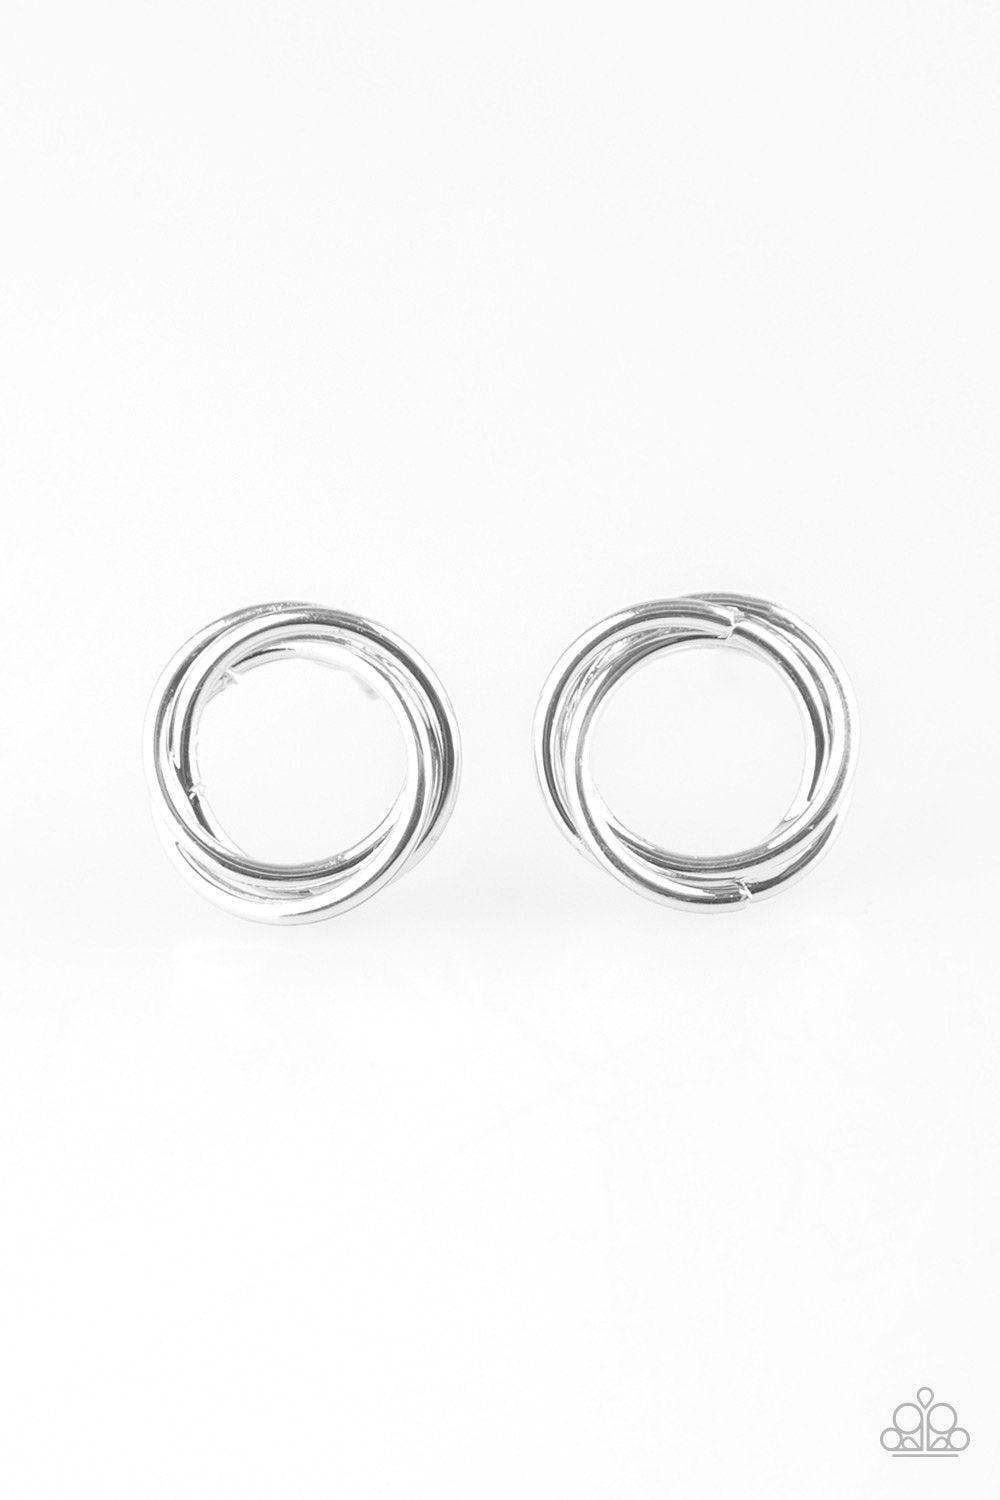 Simple Radiance Silver Post Earrings - Paparazzi Accessories-CarasShop.com - $5 Jewelry by Cara Jewels